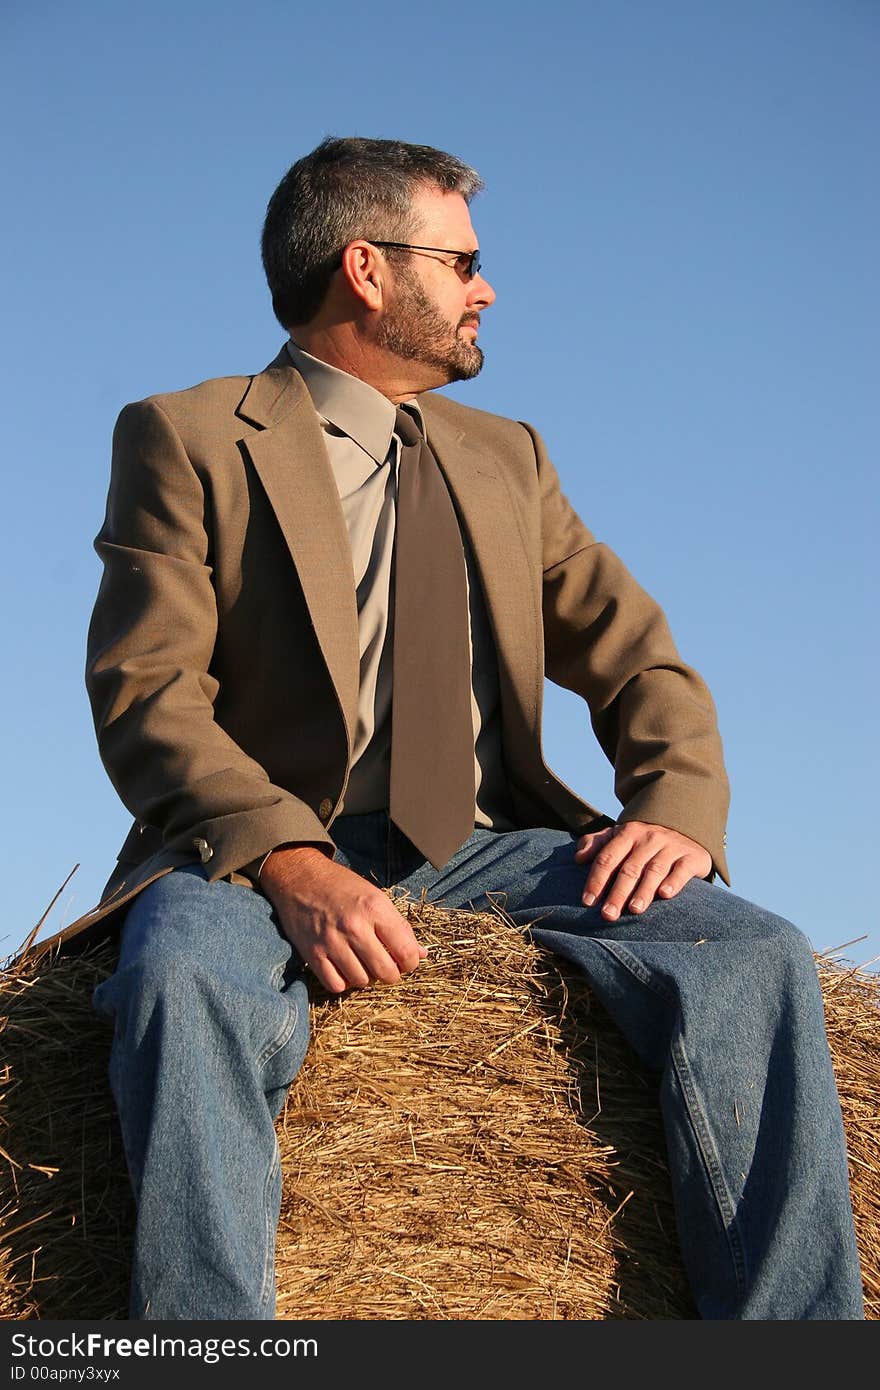 Man in jacket, tie and jeans sitting on a haystack.